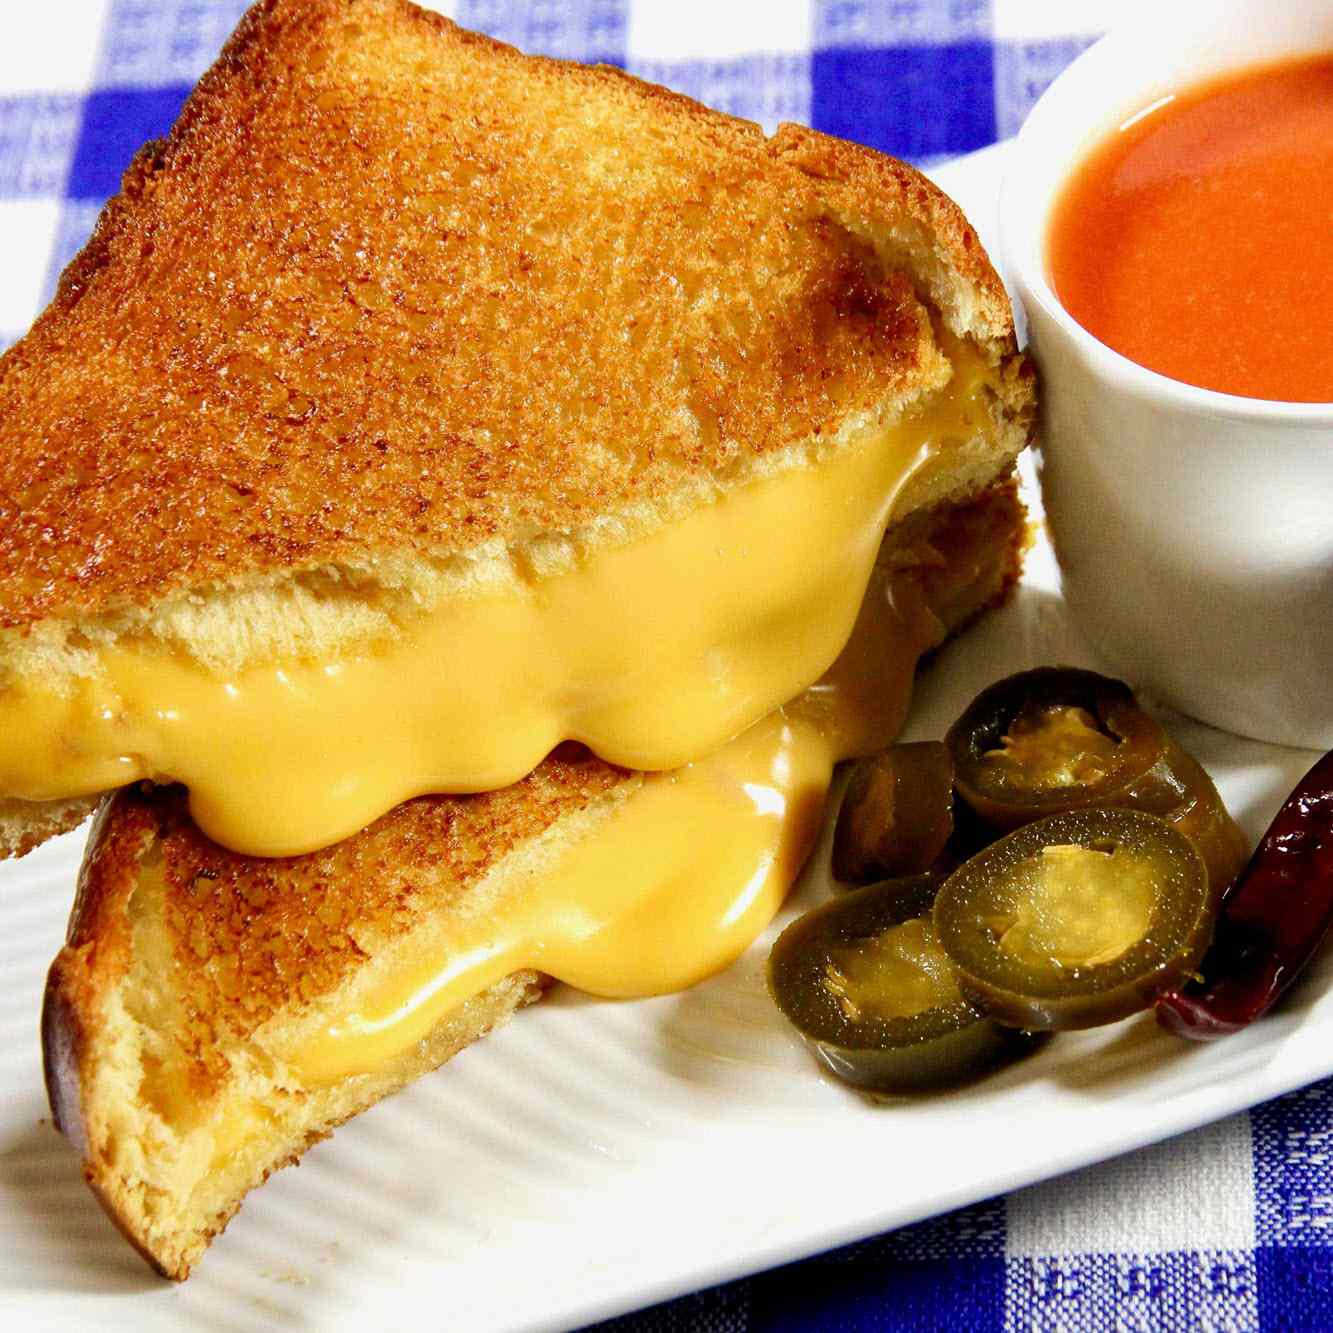 Grilled cheese sandwich on a plate with tomato soup